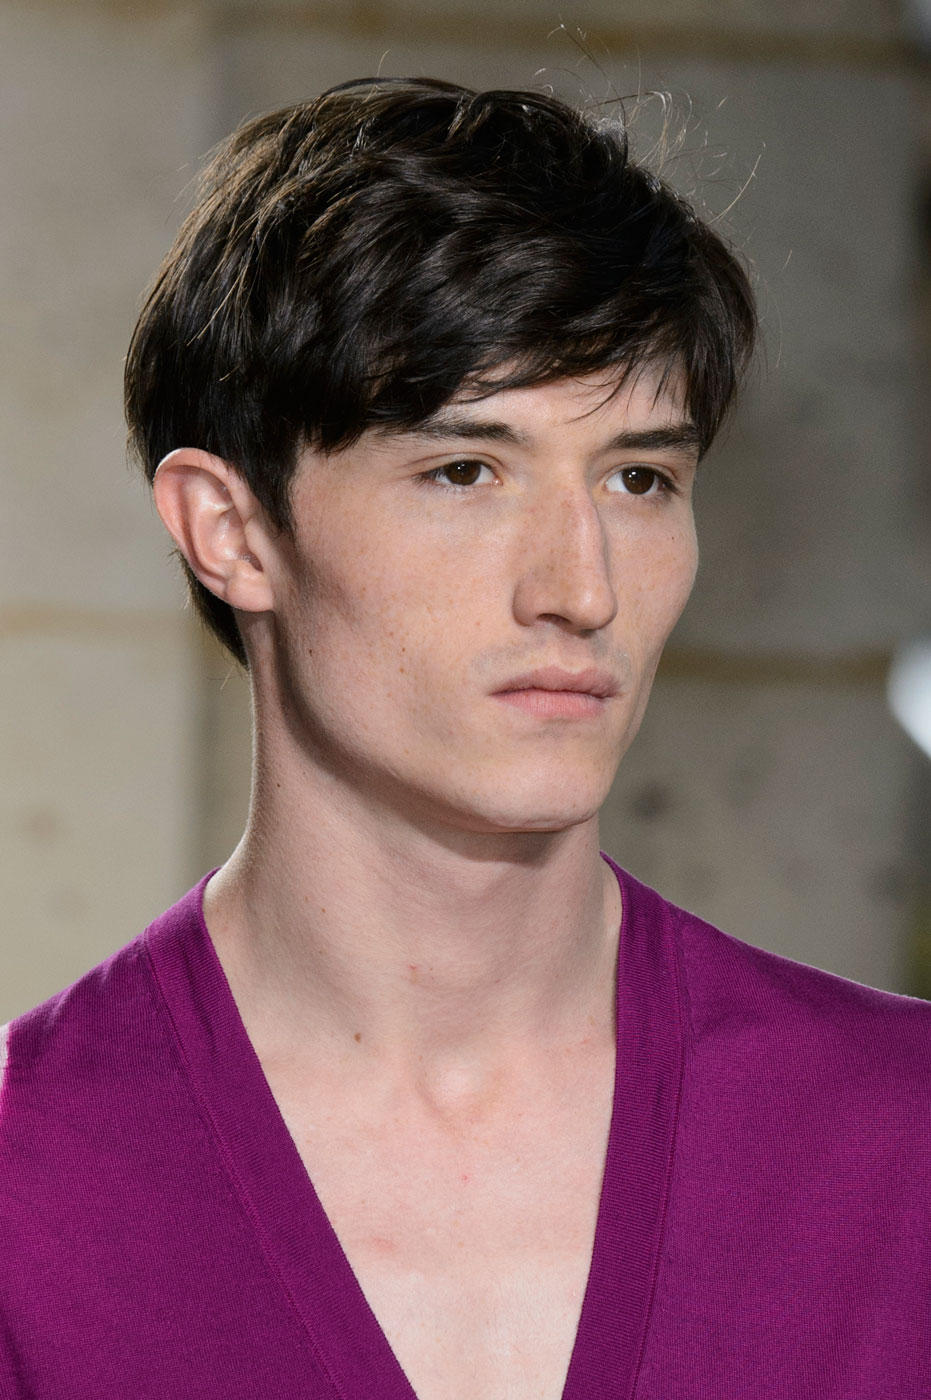 It’s a Hairstyle Affair for Men This Spring